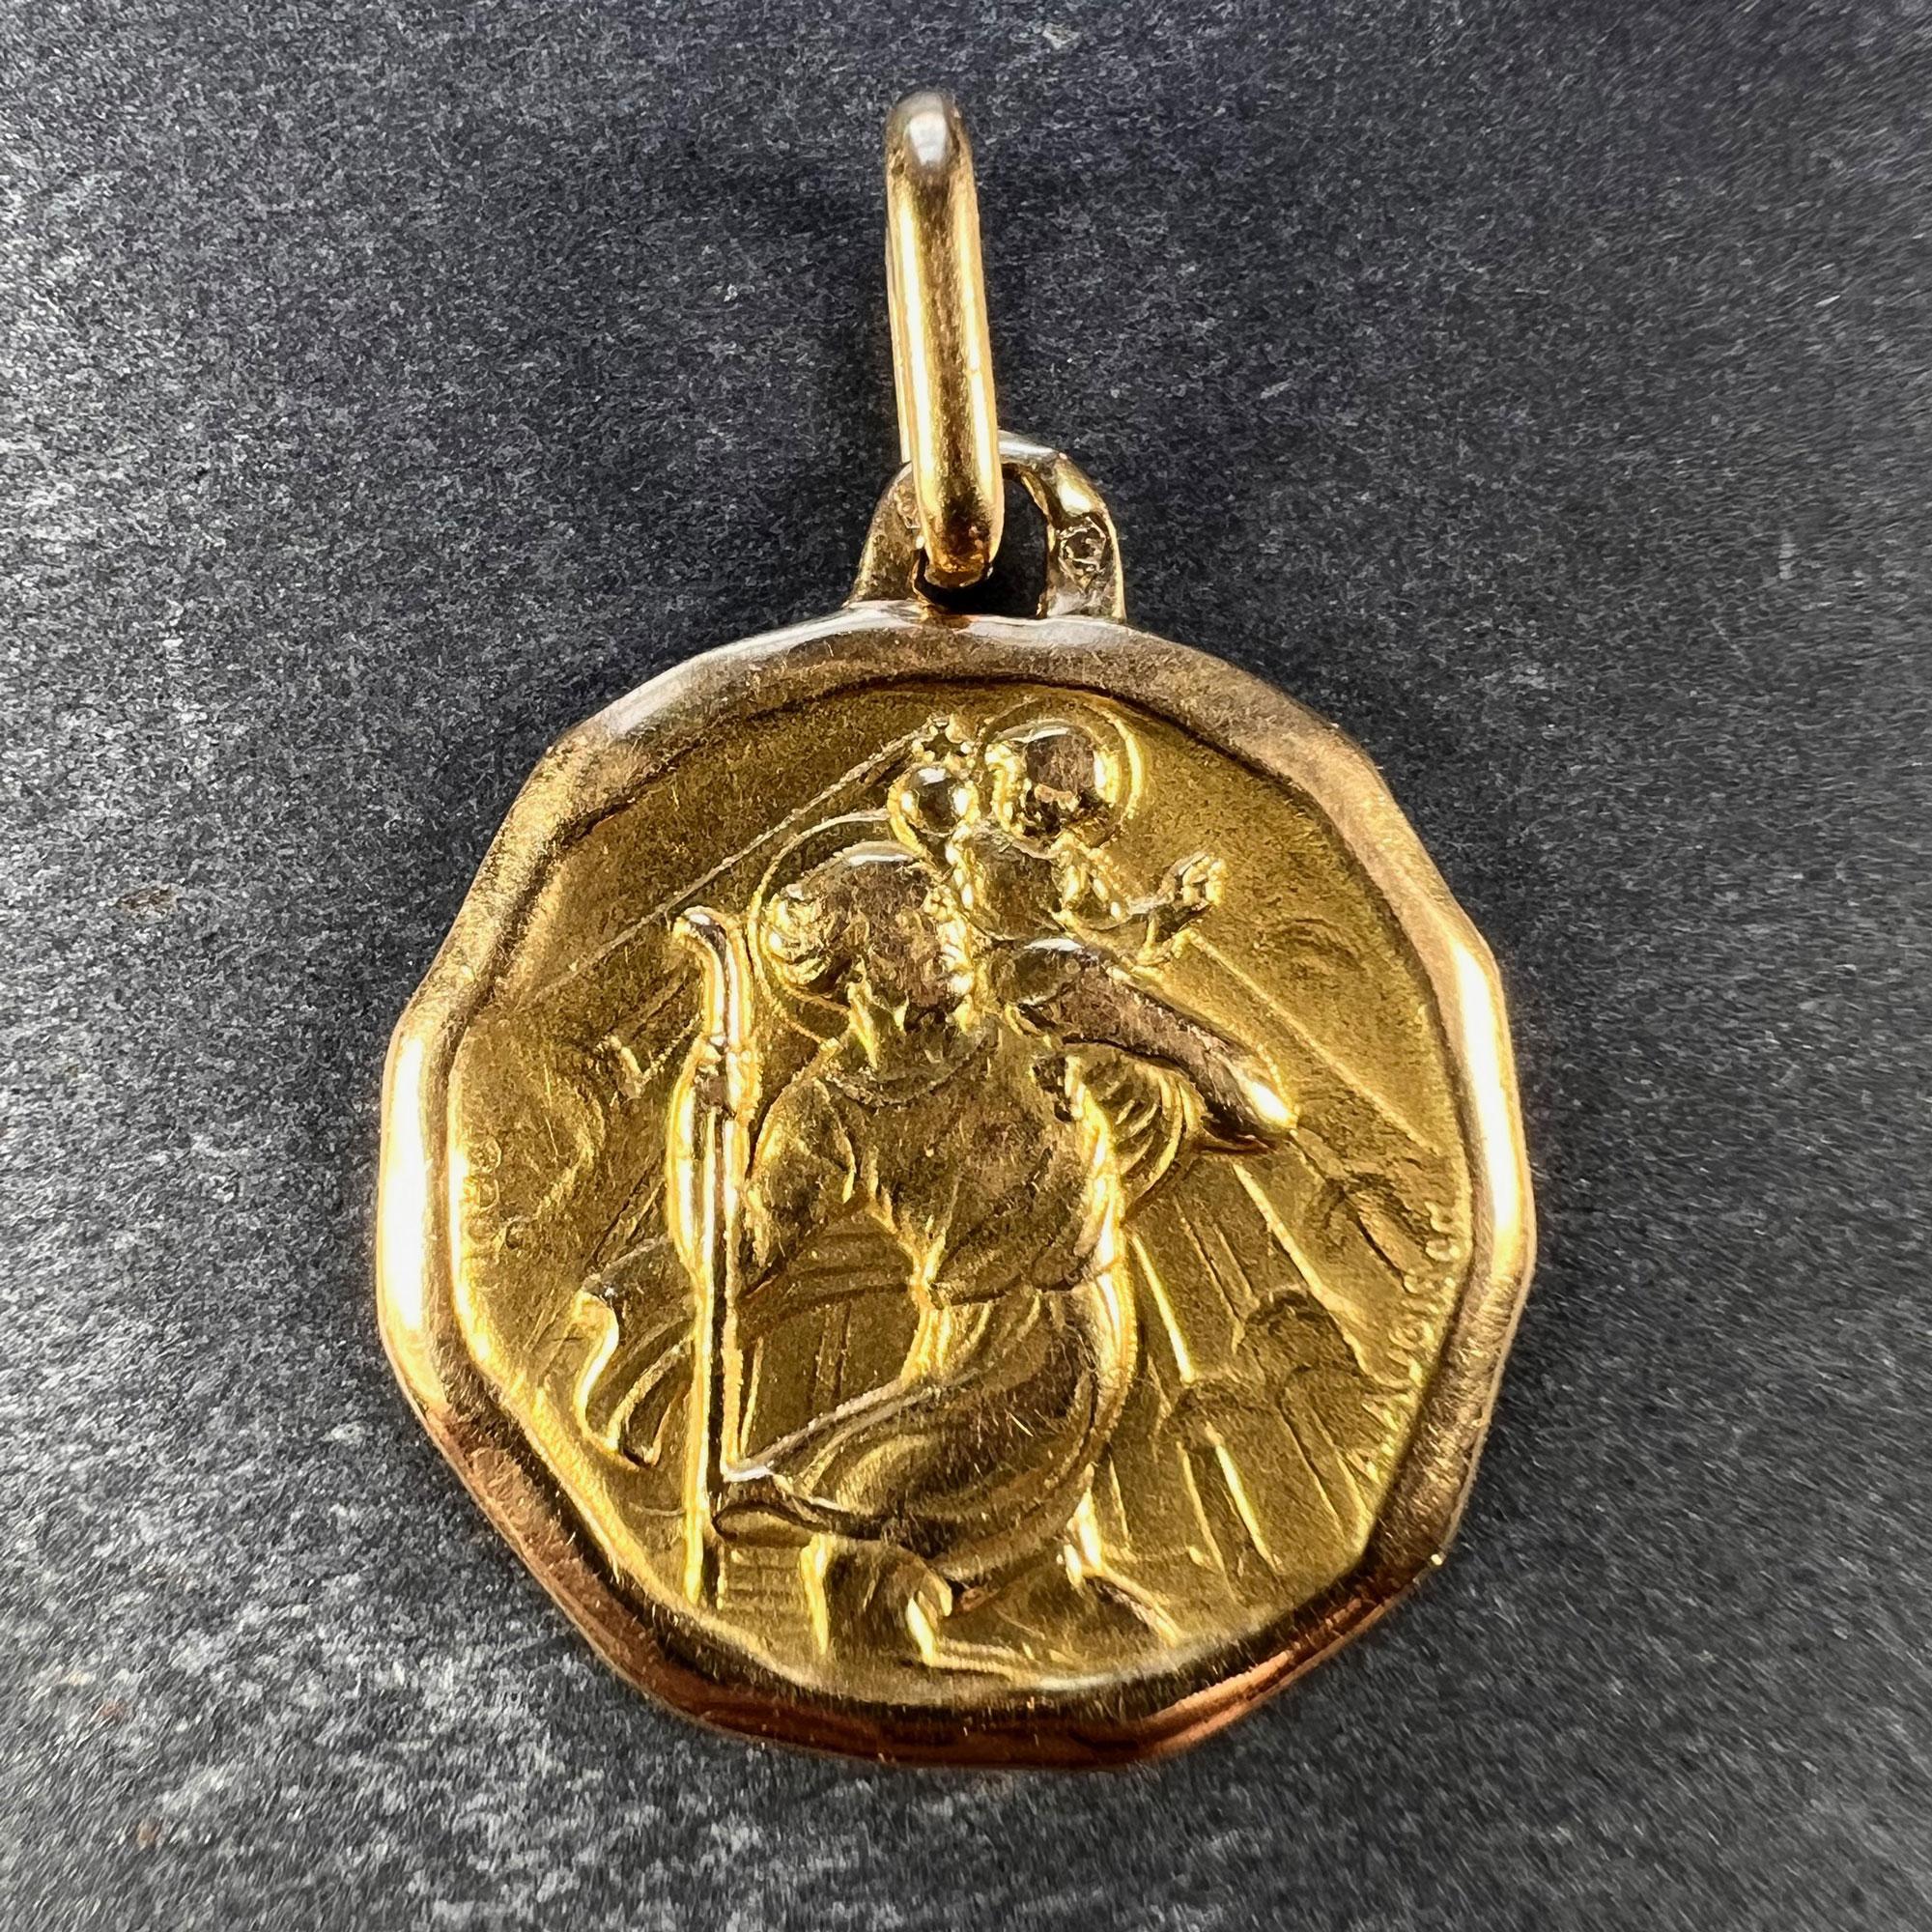 A French 18 karat (18K) yellow gold charm pendant or medal designed by Grun for Augis depicting St Christopher carrying the infant Christ across the river. Stamped with the eagle's head for French manufacture, Augis' makers mark, and signed A. Augis